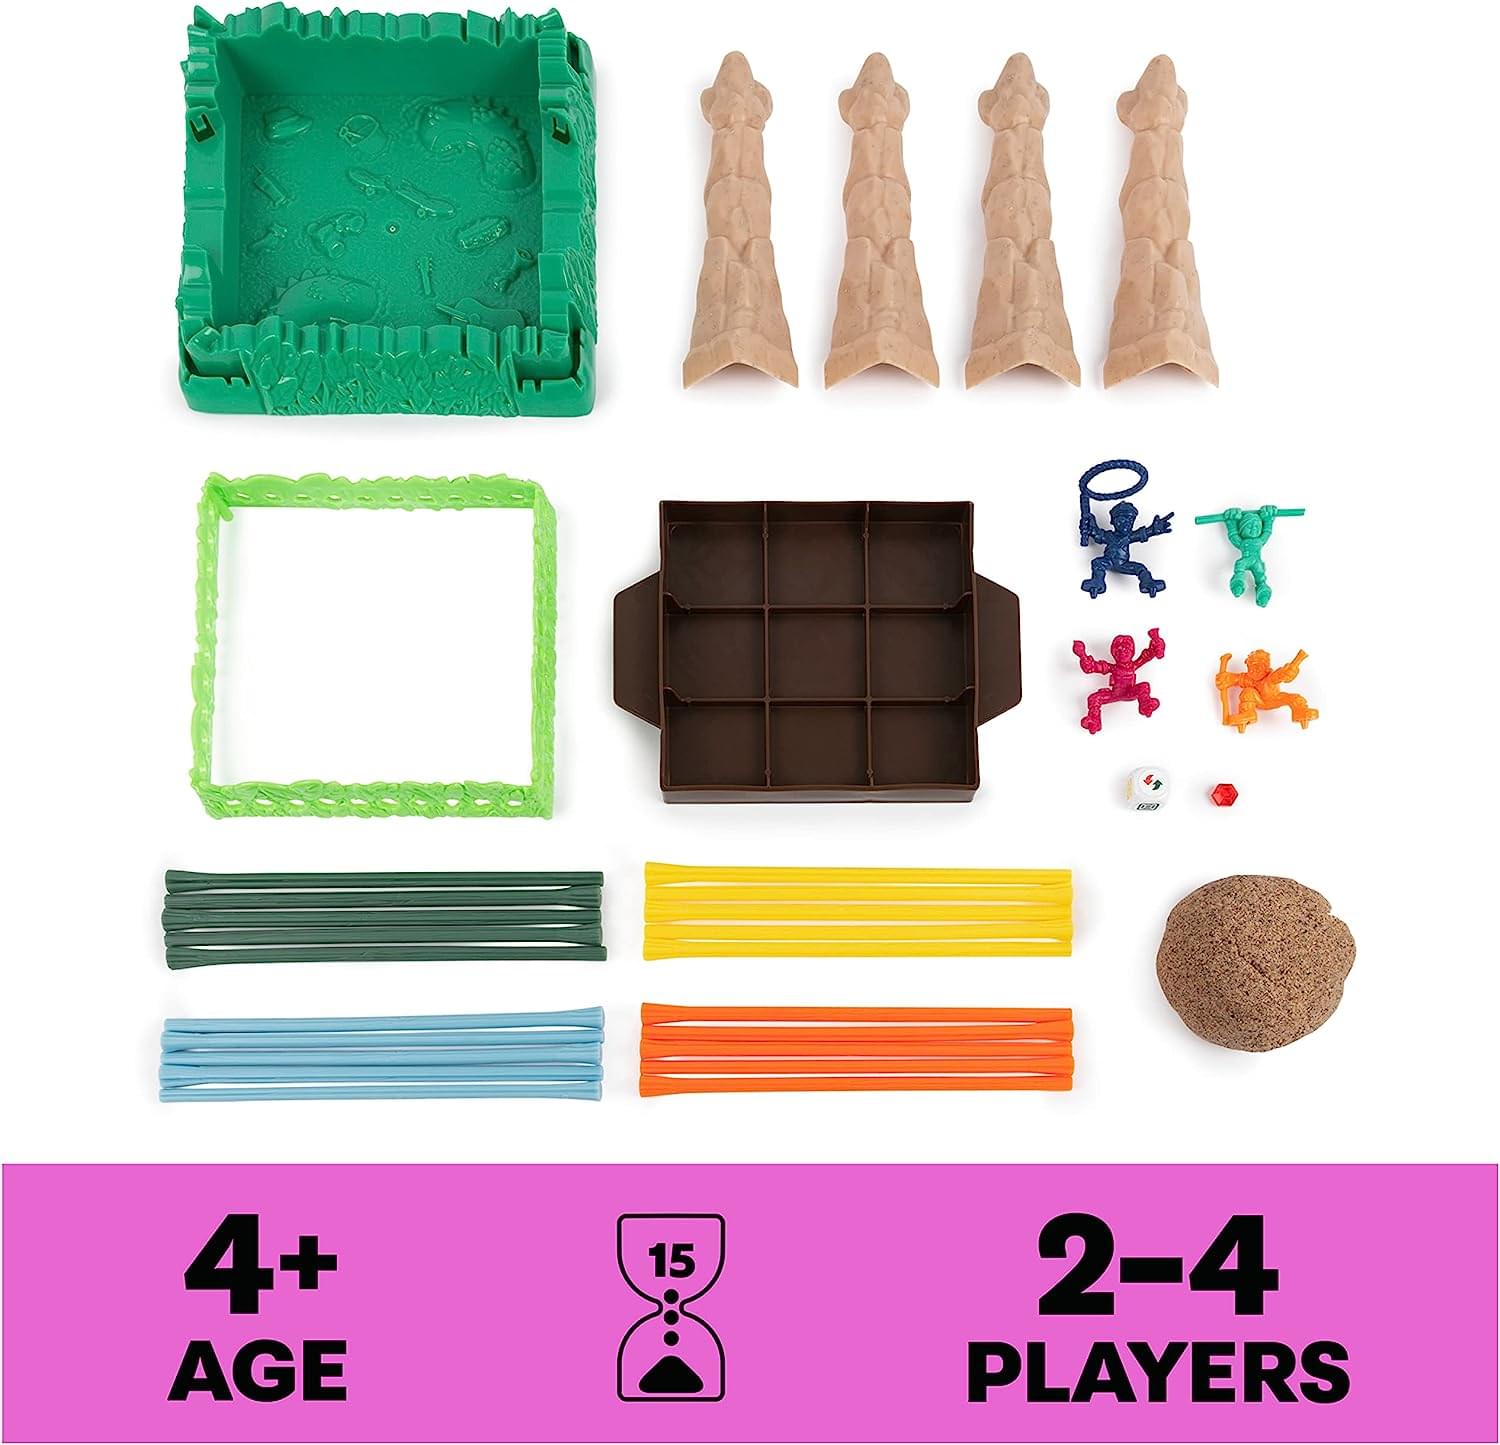 Sink N Sand Board Game with Kinetic Sand